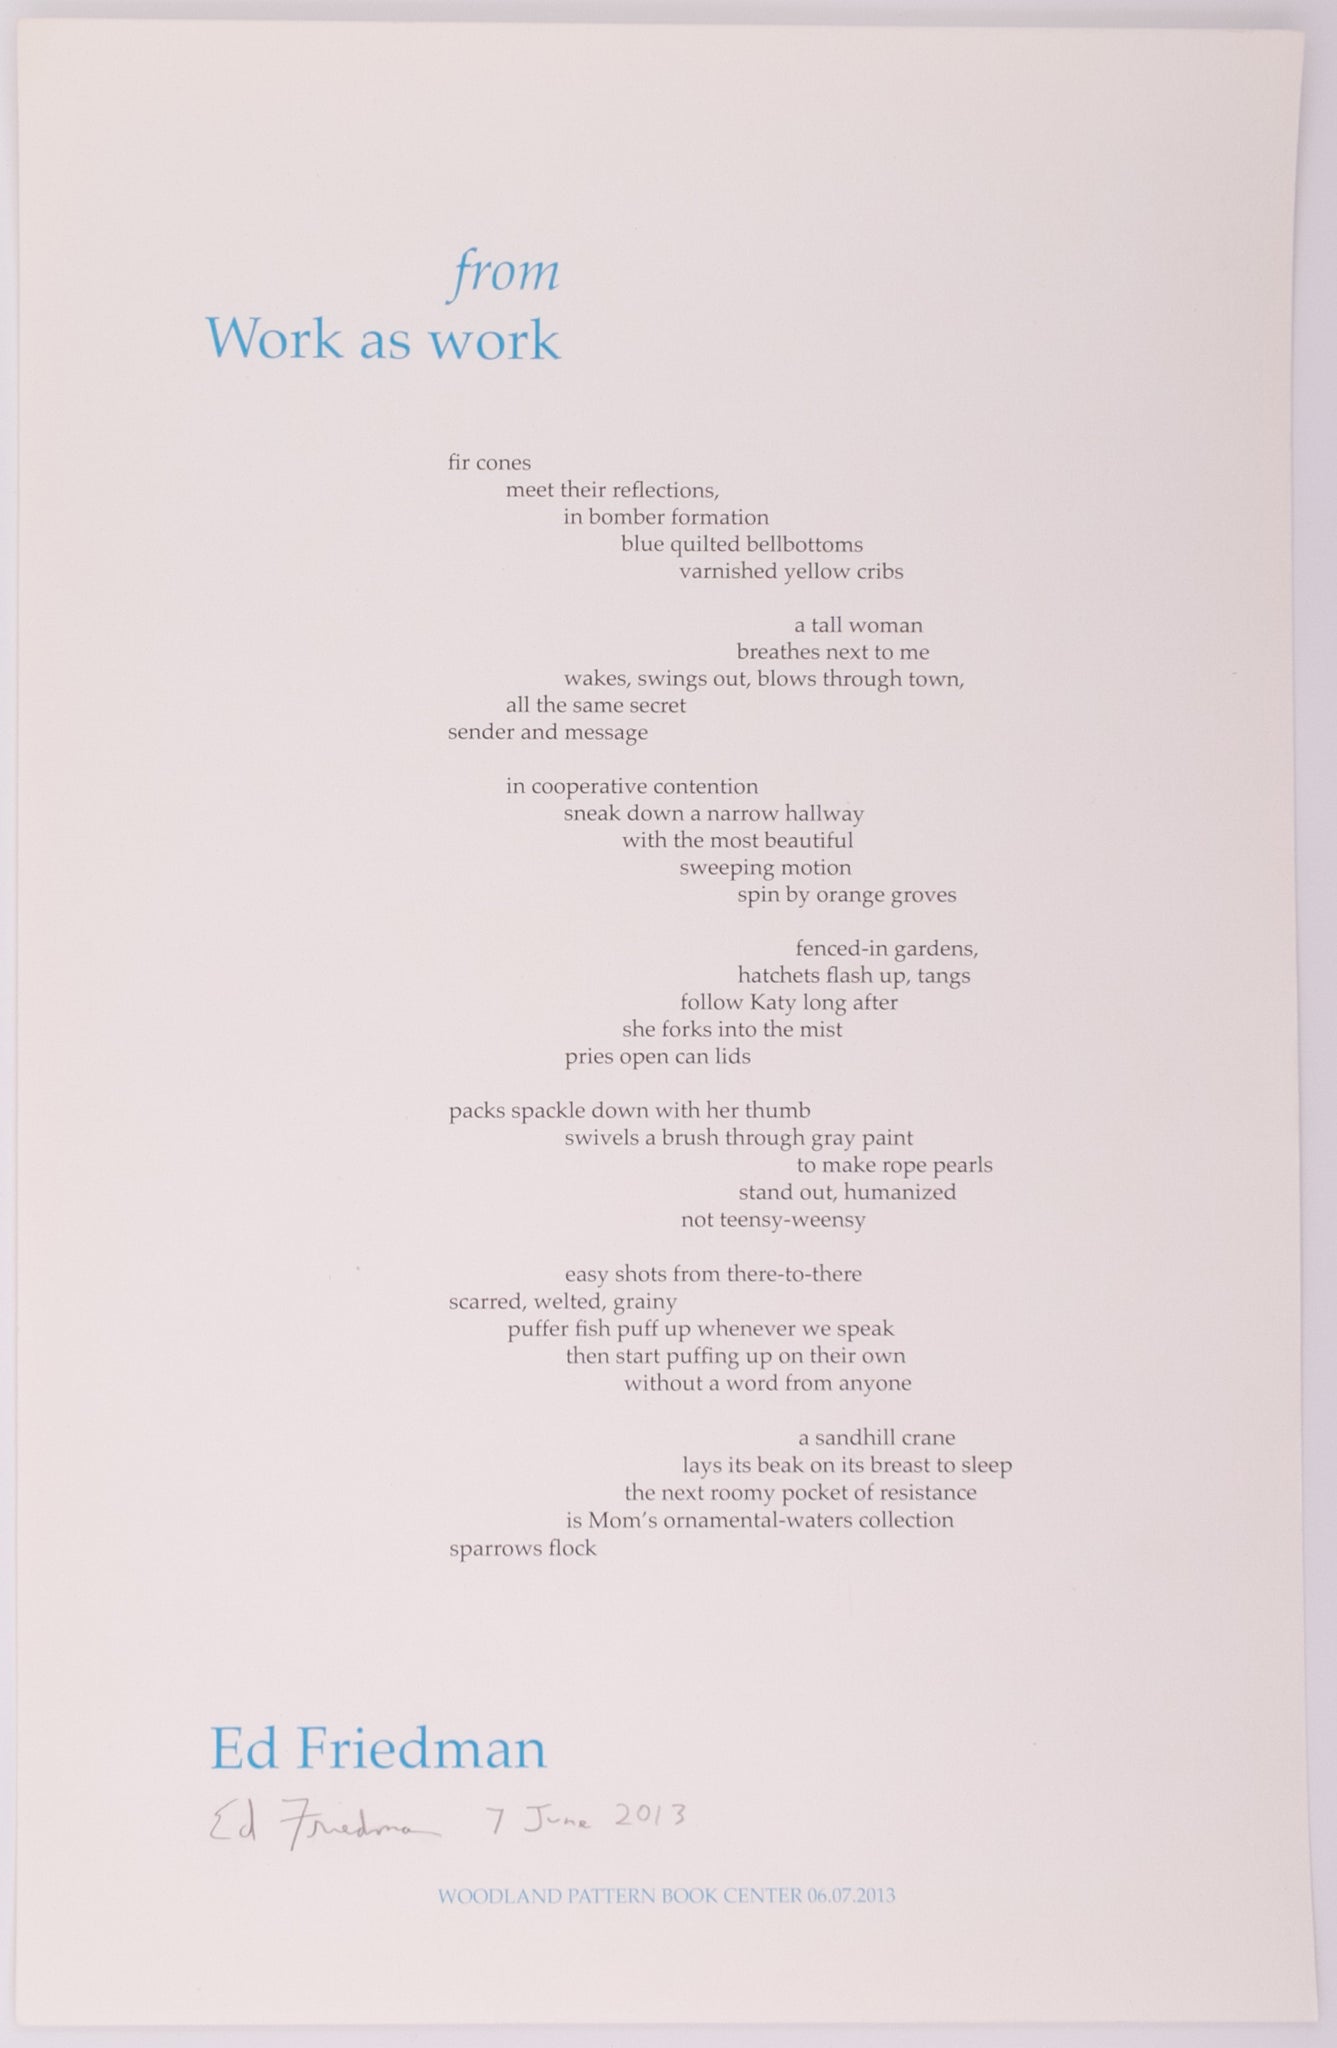 Broadside titled from work as work by Ed Friedman. Blue and black text on grey paper.